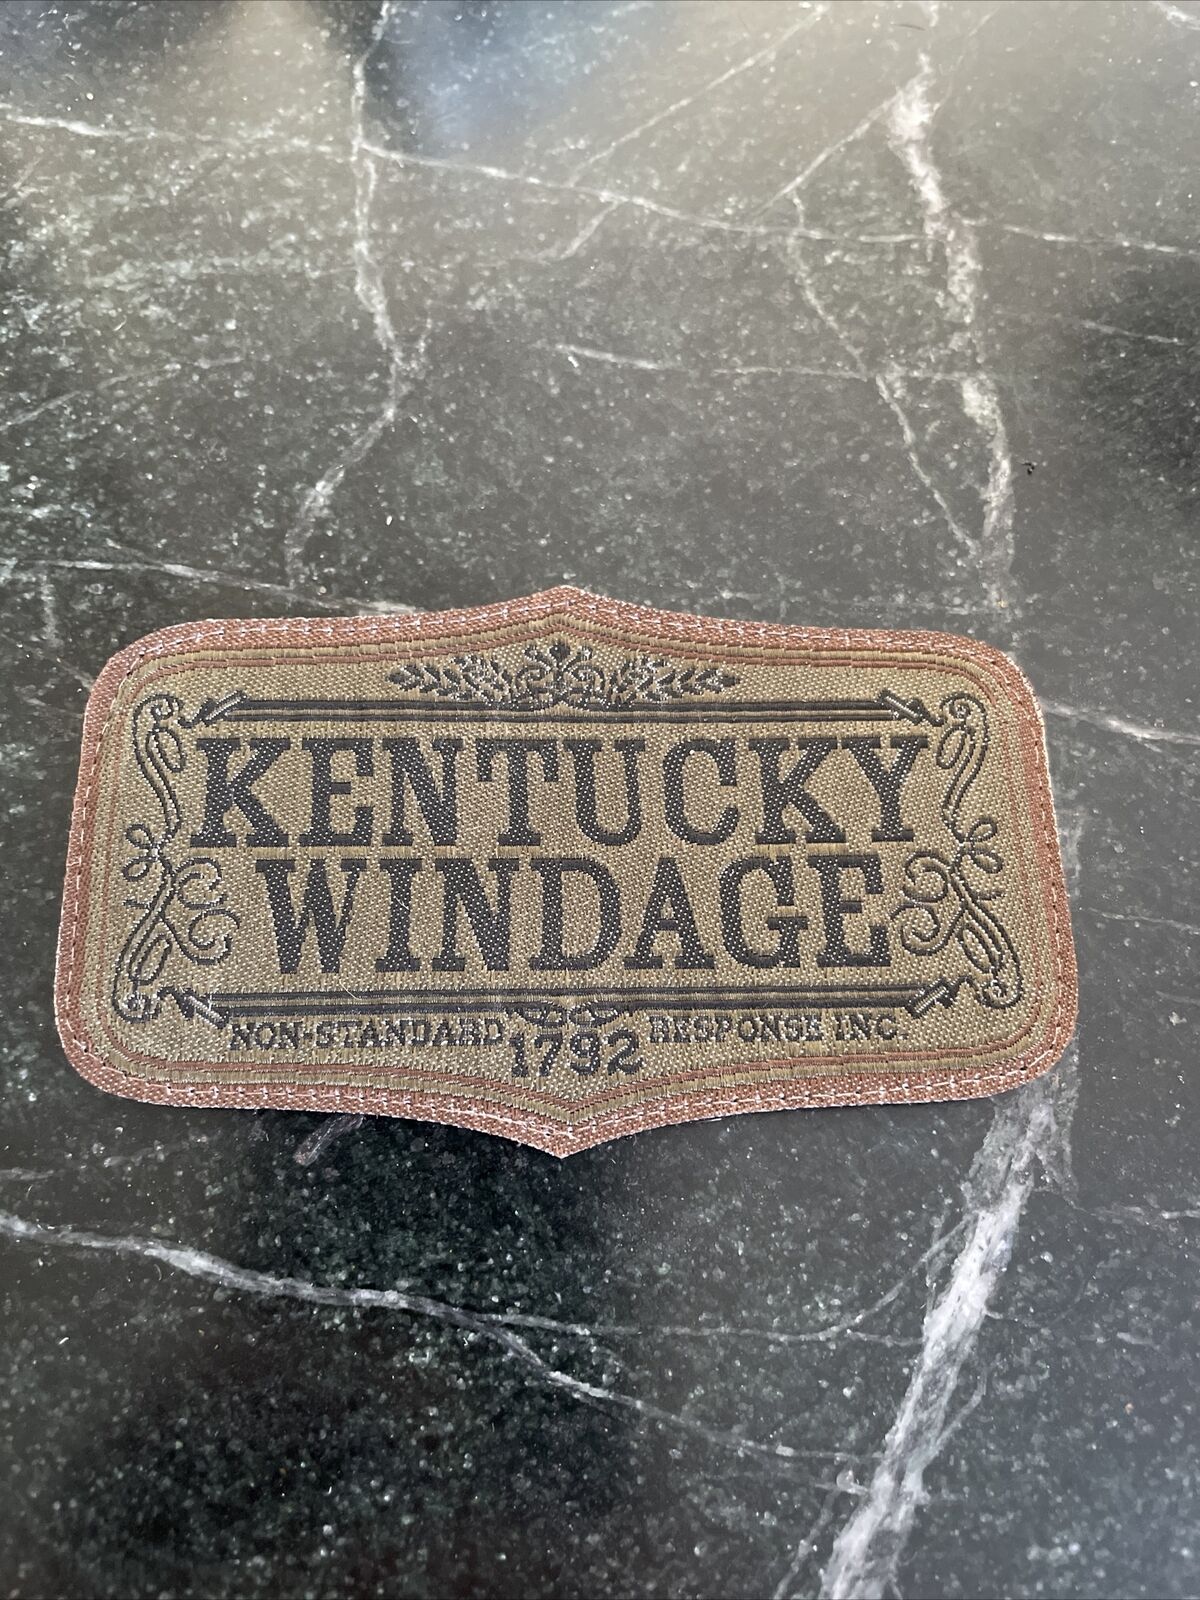 Kentucky Windage tactical morale US military patch airsoft Vtg Shooter Gun Wind